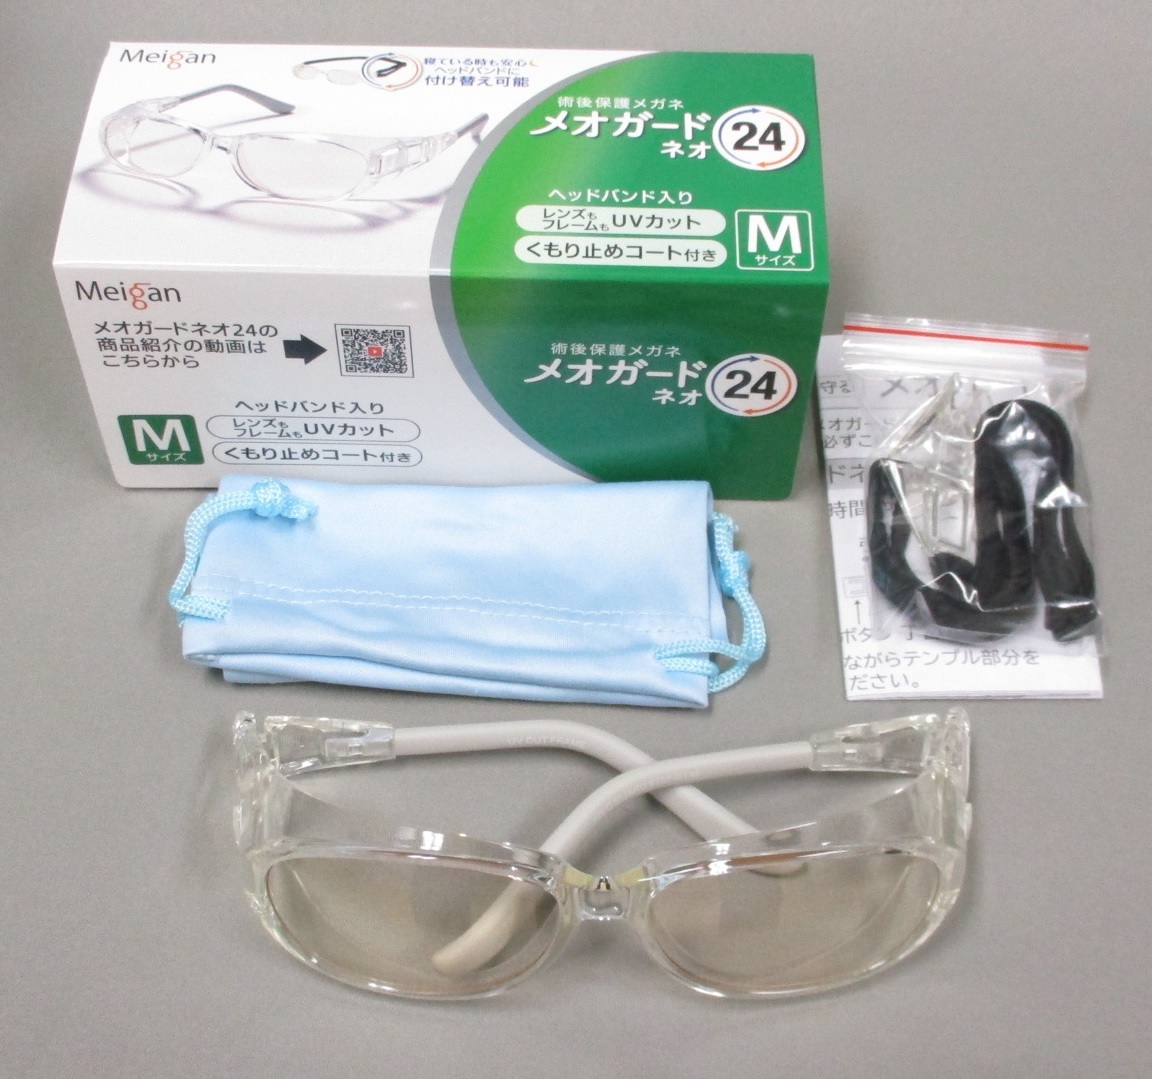  pollen prevention * white inside . hand . after protection glasses M *meo guard 24 * 24 hour eye . protection M